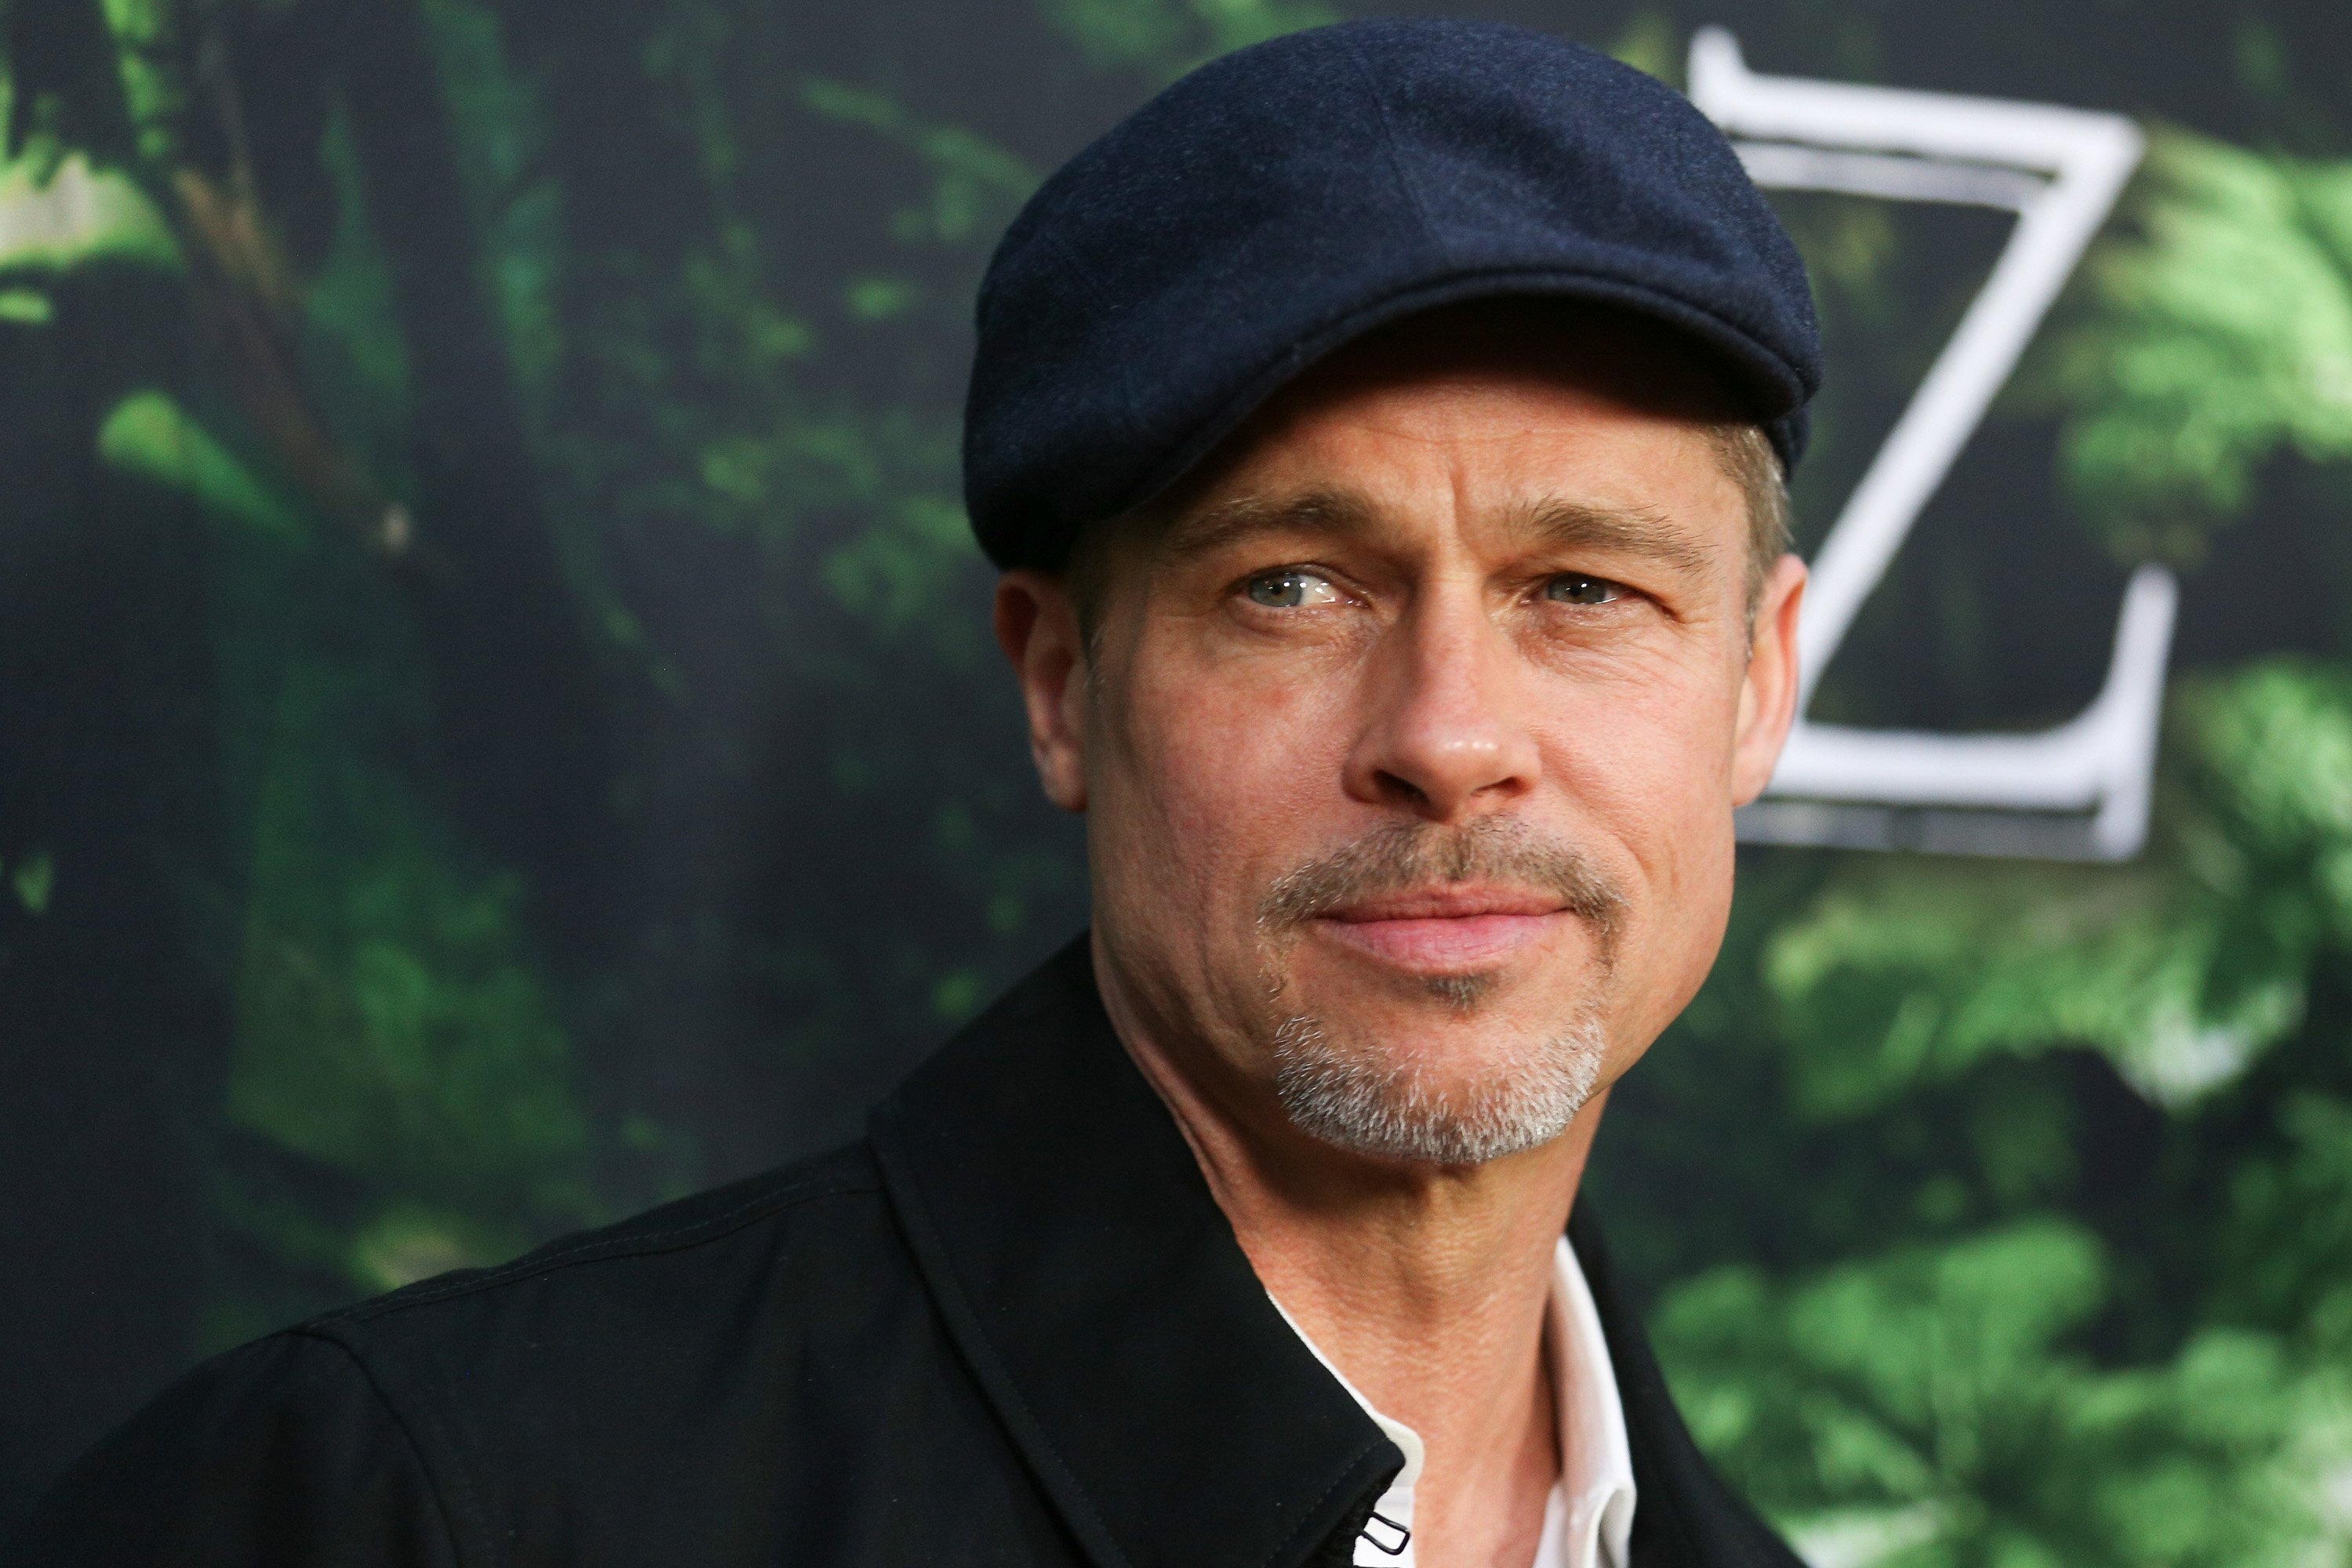 Brad Pitt attends the premiere of "The Lost City of Z" in Hollywood, California on April 5, 2017 | Photo: Getty Images